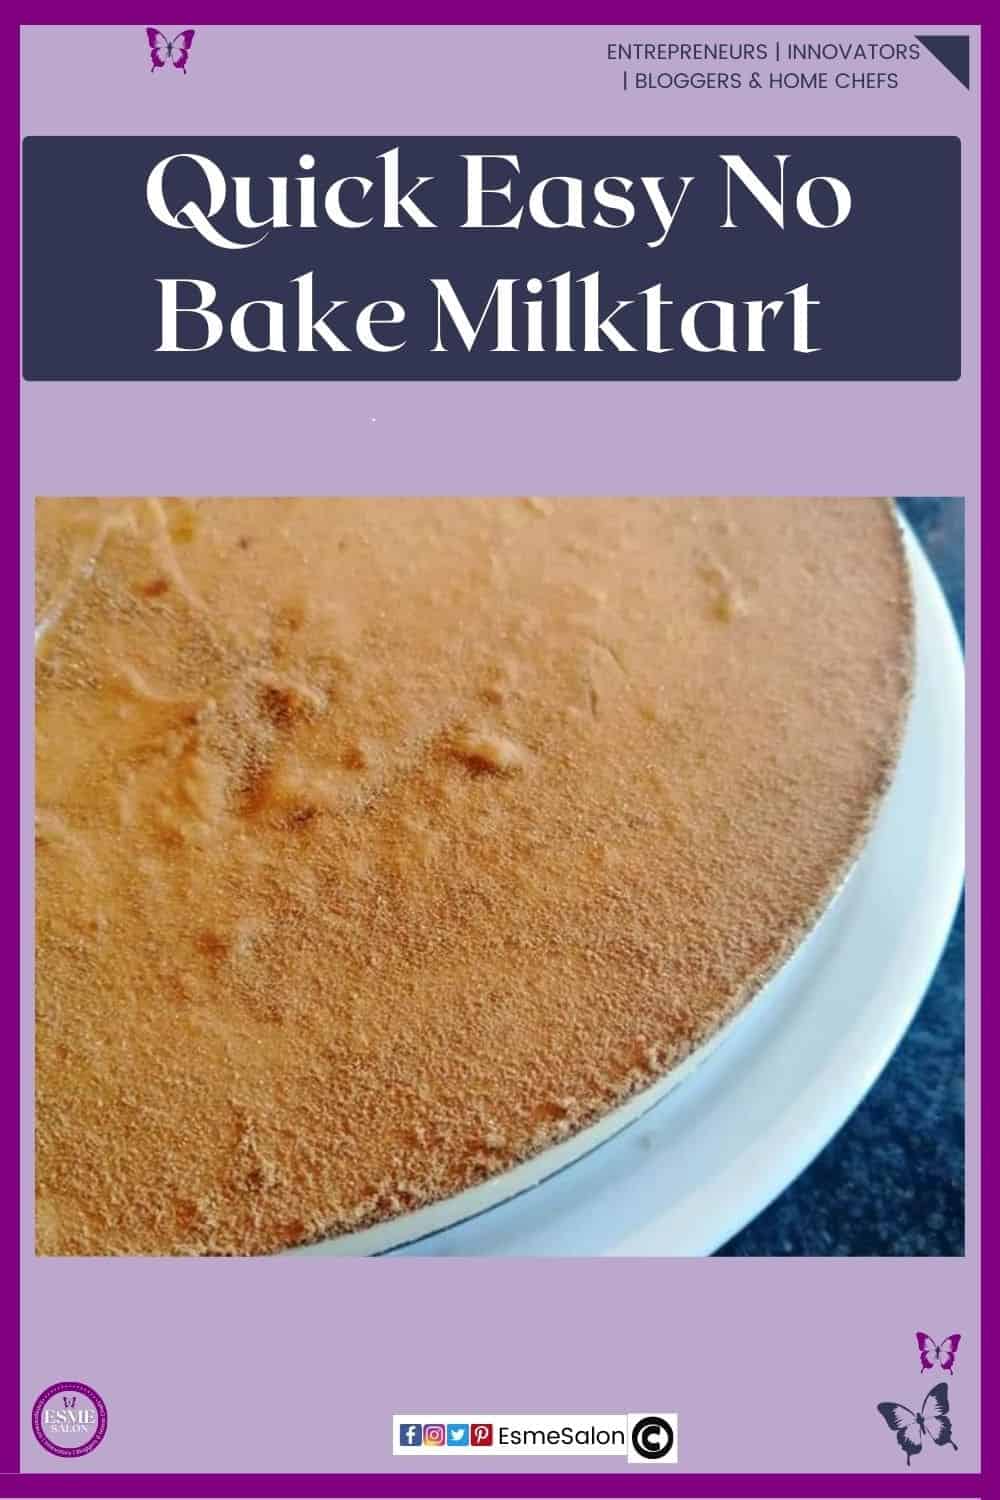 an image of a half round of Quick Easy No Bake Milktart on a white side plate